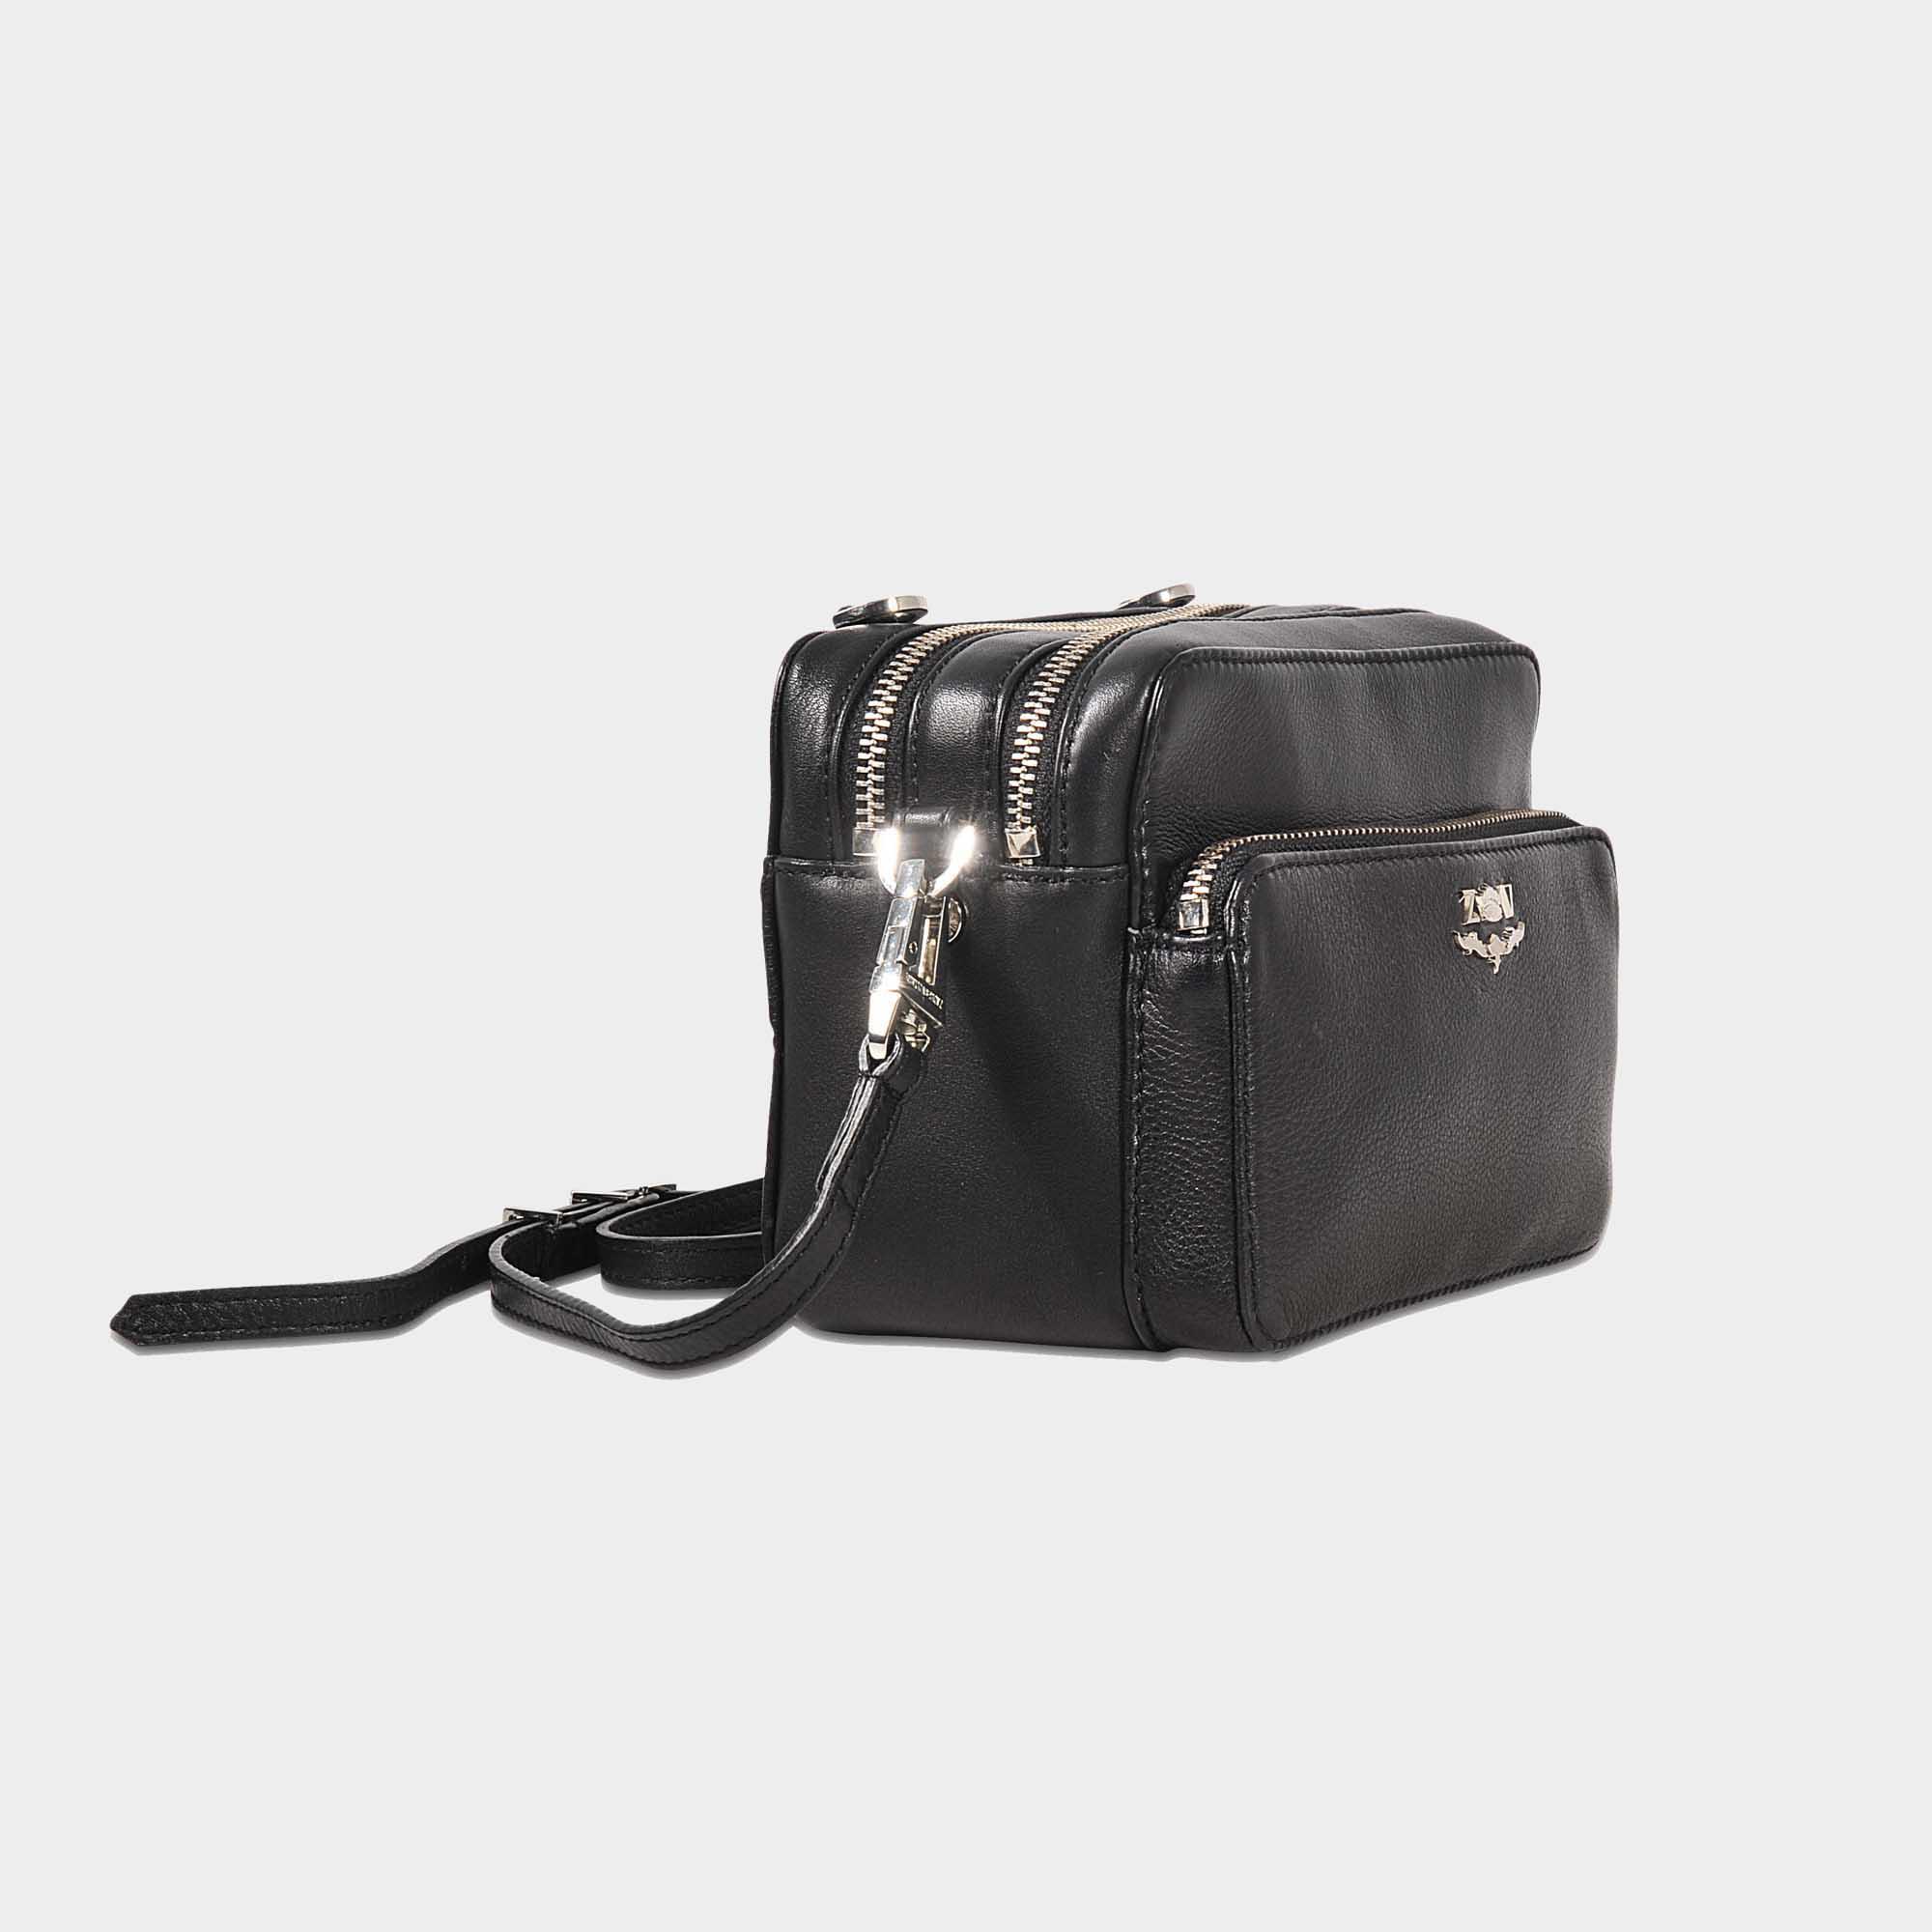 Zadig & Voltaire Boxy Xl Bag in Black | Lyst